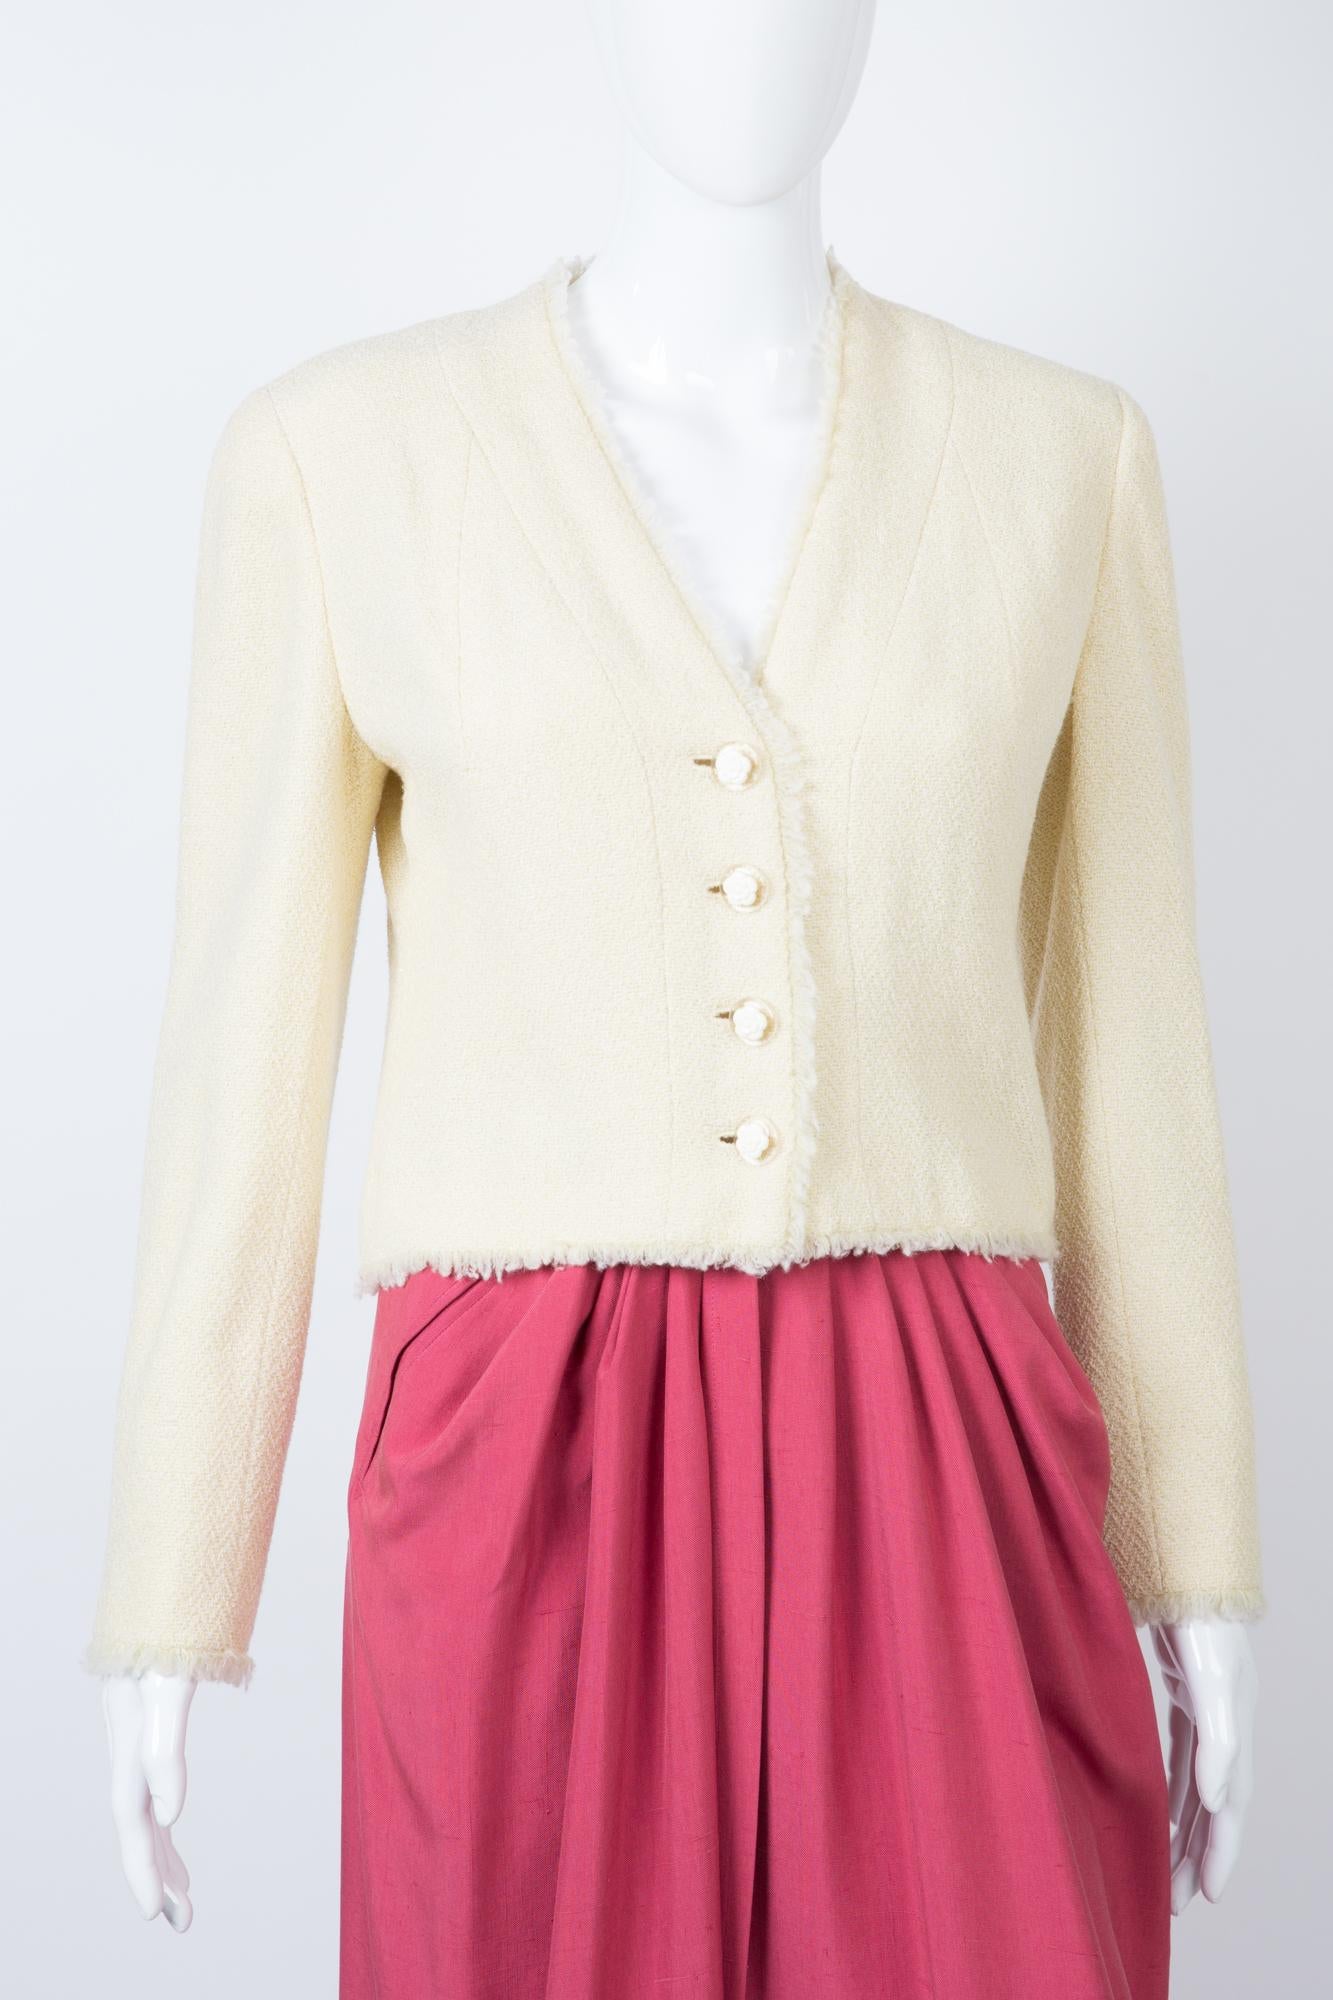 Chanel  ivory and lurex tweed wool boucle jacket 2000s Croisiere featuring a short fitted shape, a back gilet slit detail, front fancy camelias buttons, fringed edges, an ivory silk lining, and a silver hardware chain in the bottom lining.
Label